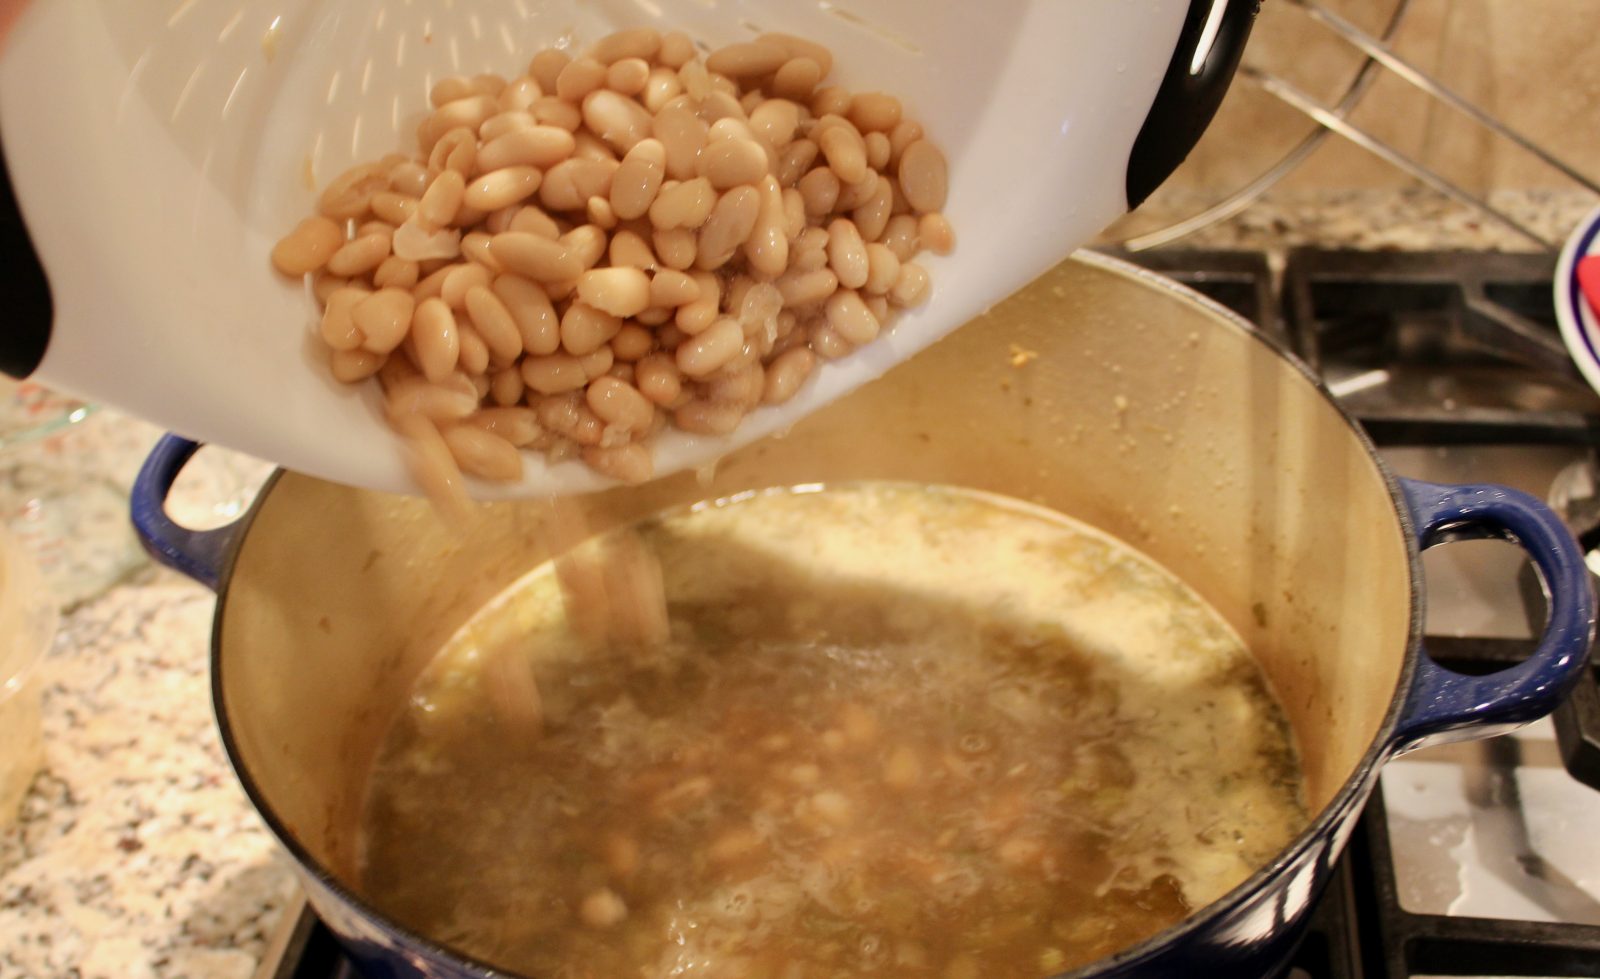 Recipe photo for White Chicken Chili showing adding cannellini beans from a white collander into a blue Le Creuset dutch oven with the simmering broth and vegetables in the pot. The pot is on a gas stovetop.